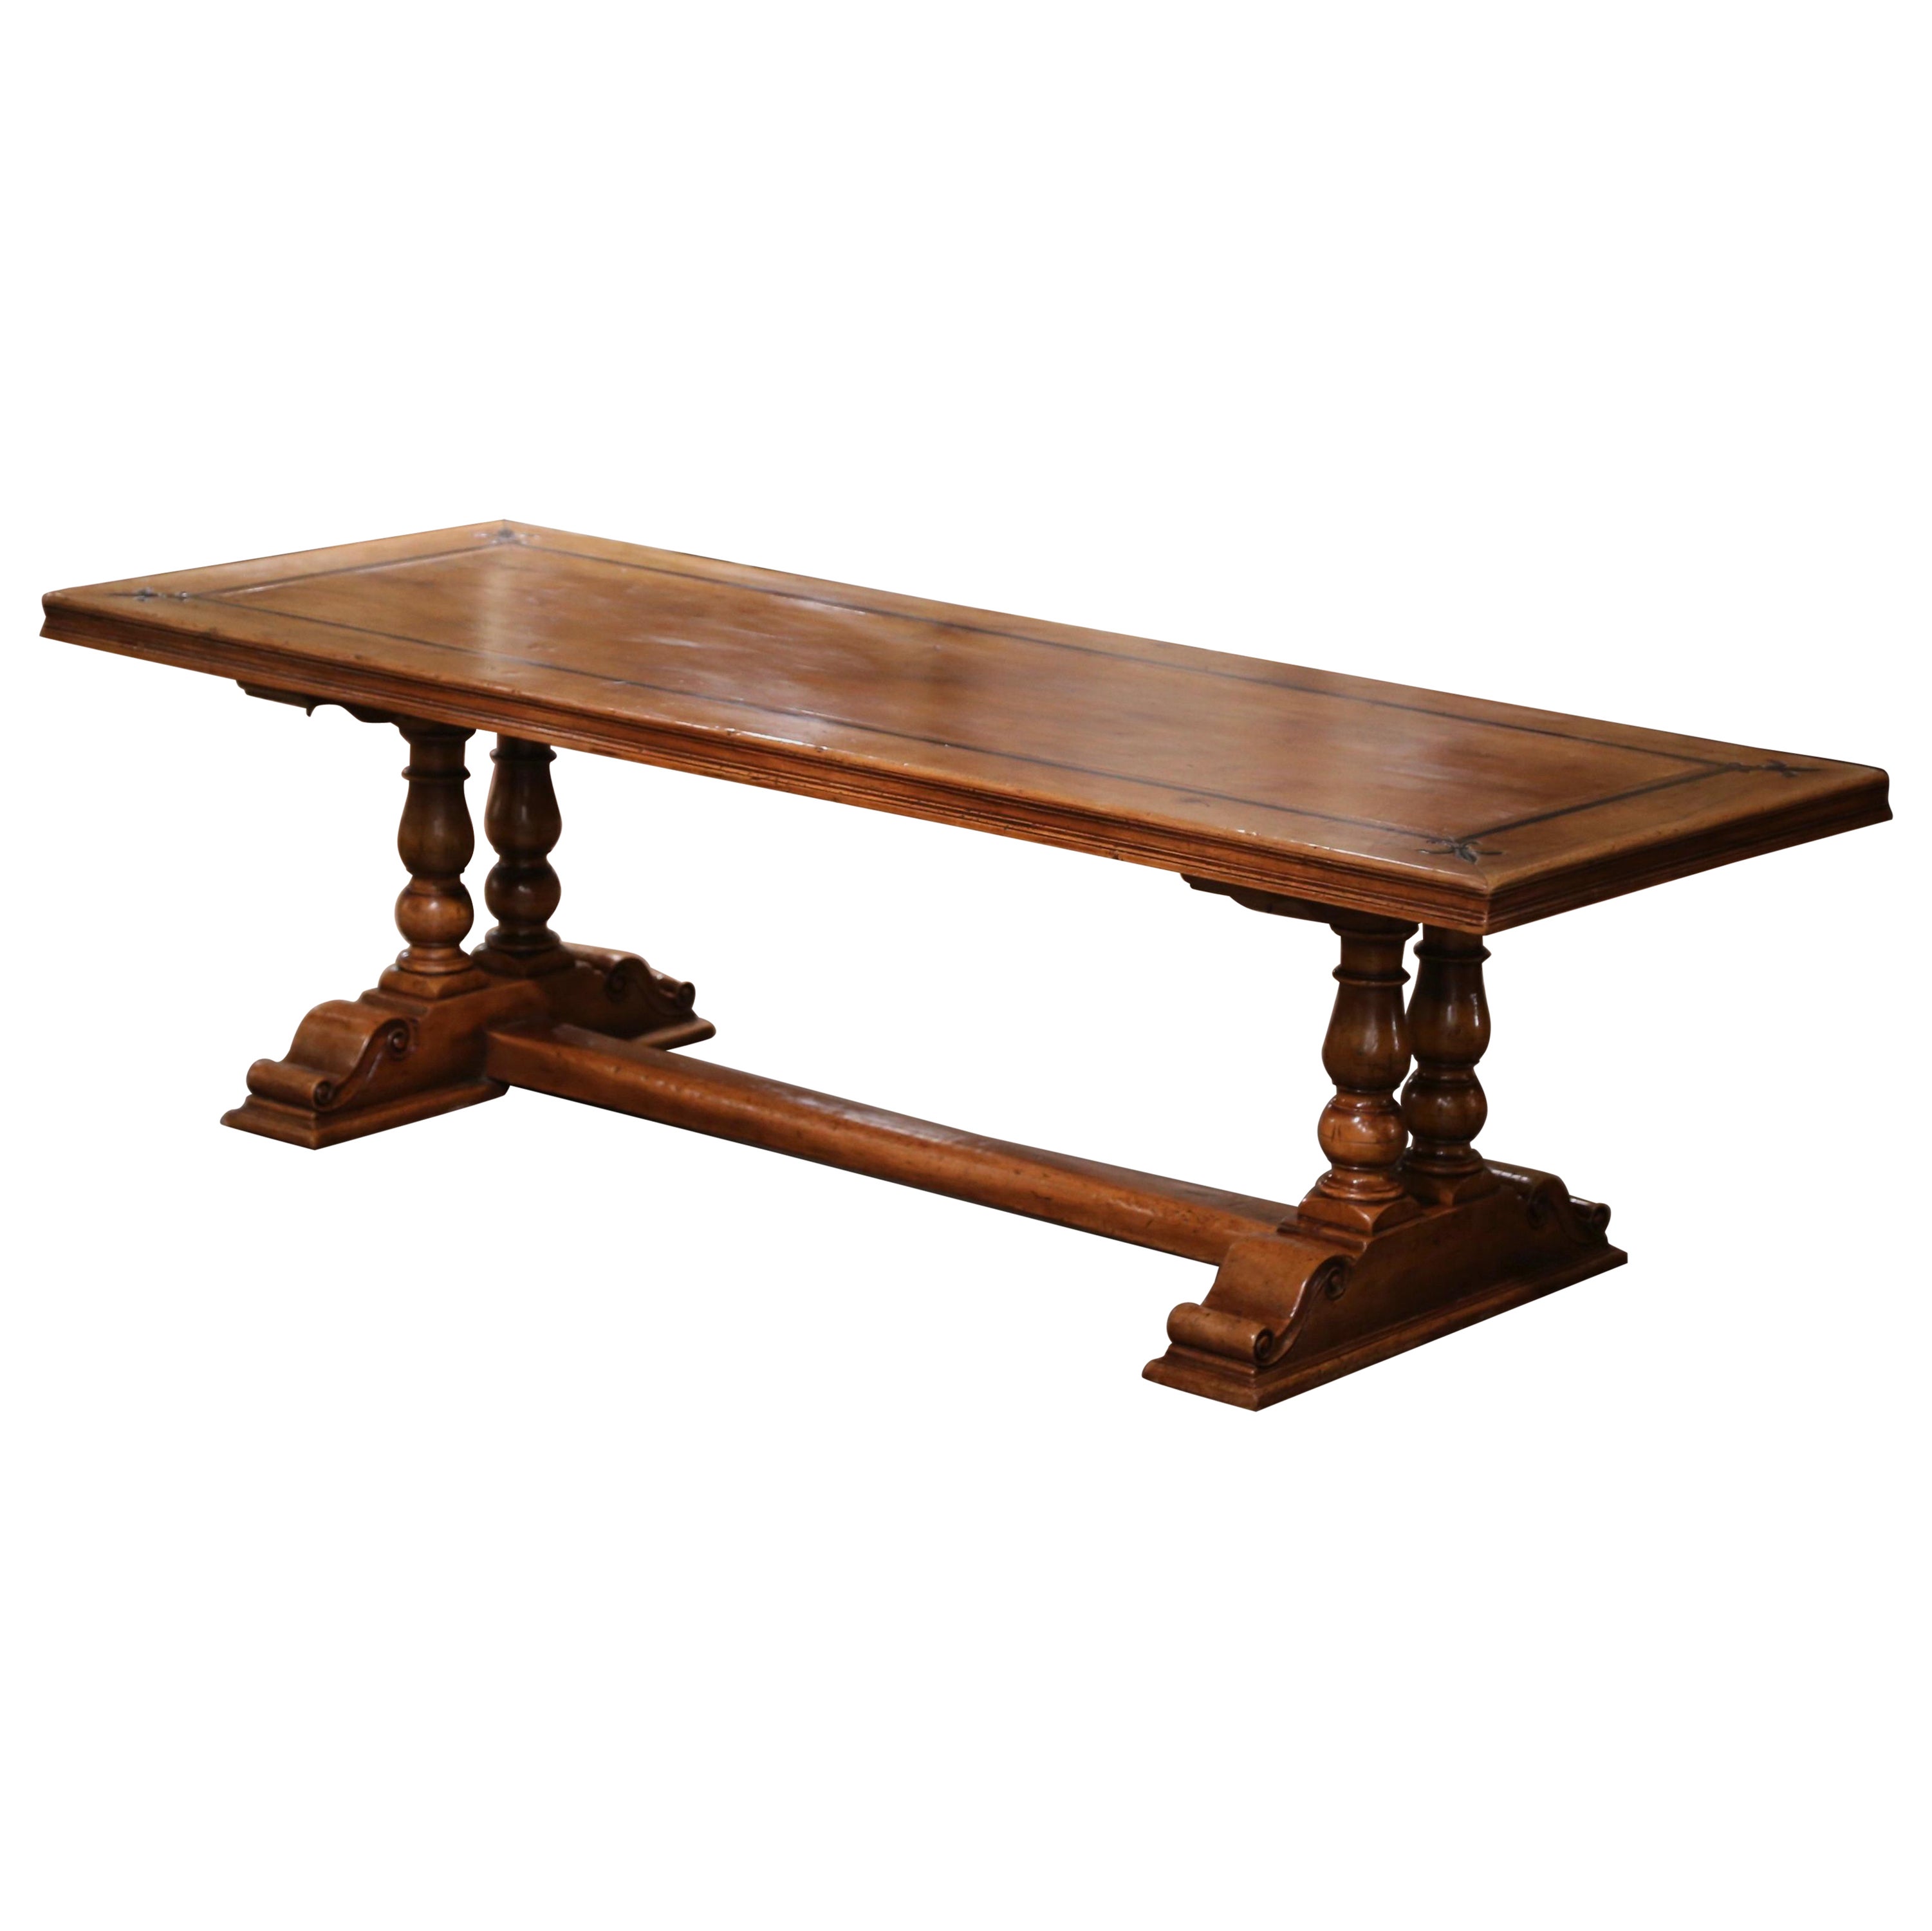  French Louis XIII Carved Walnut Trestle Dining Table with Fleur de Lys Decor